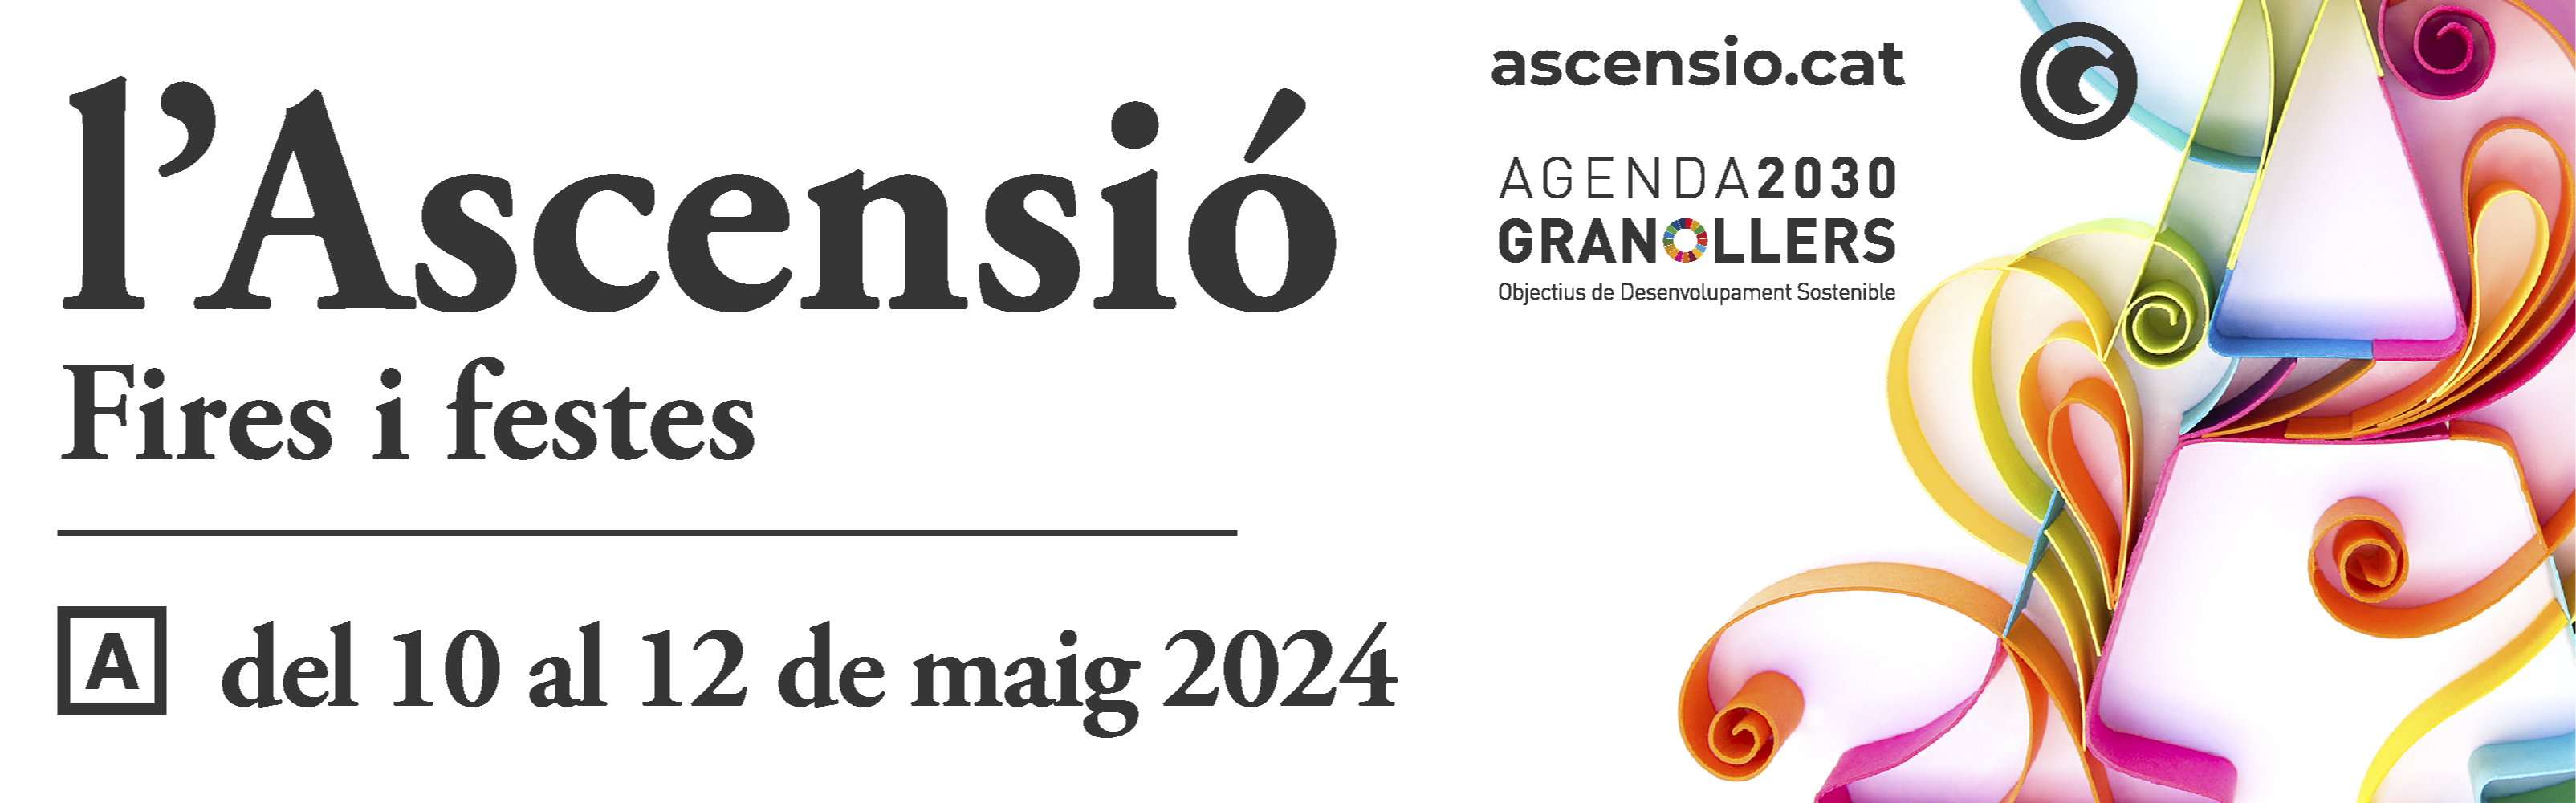 ASCENSIOGRANOLLERS2024